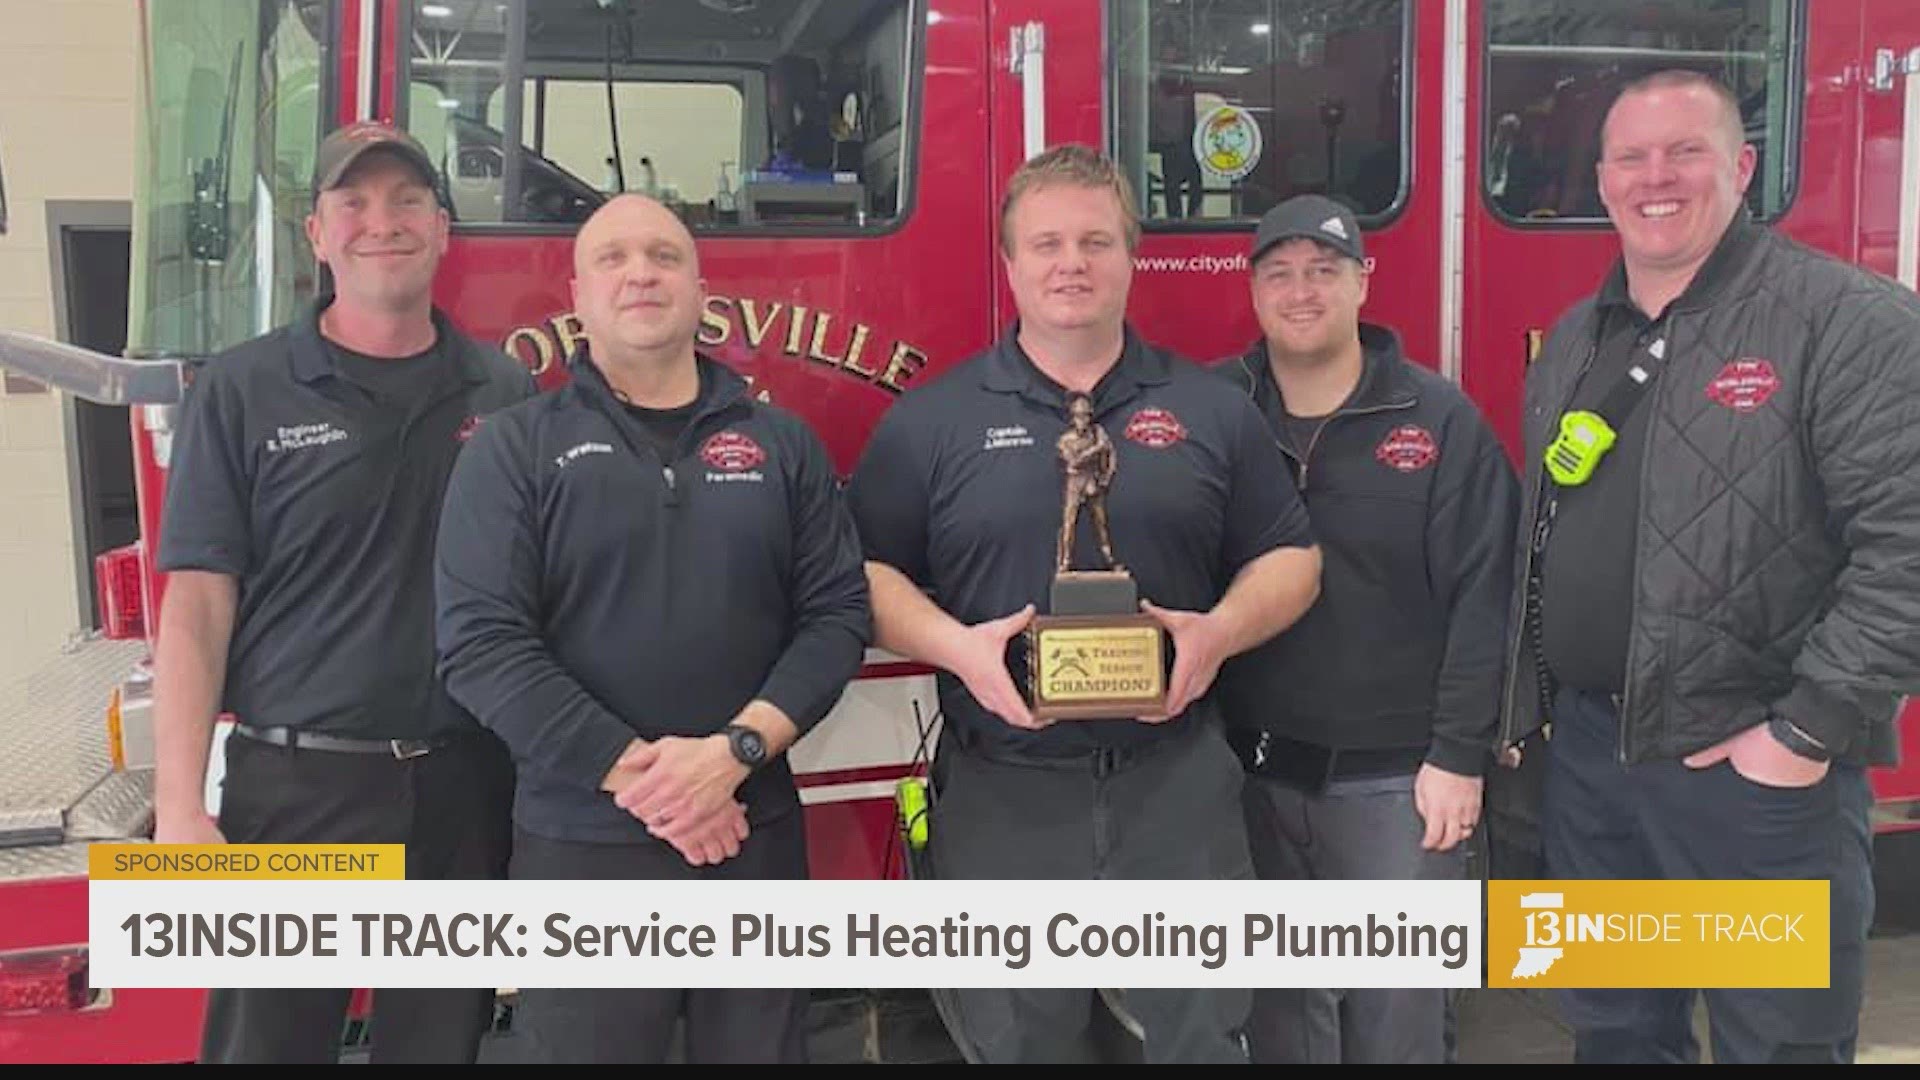 Service Plus awarded firefighter Jeremiah Monroe and his family with a brand new, energy-efficient HVAC system and a new water heater.